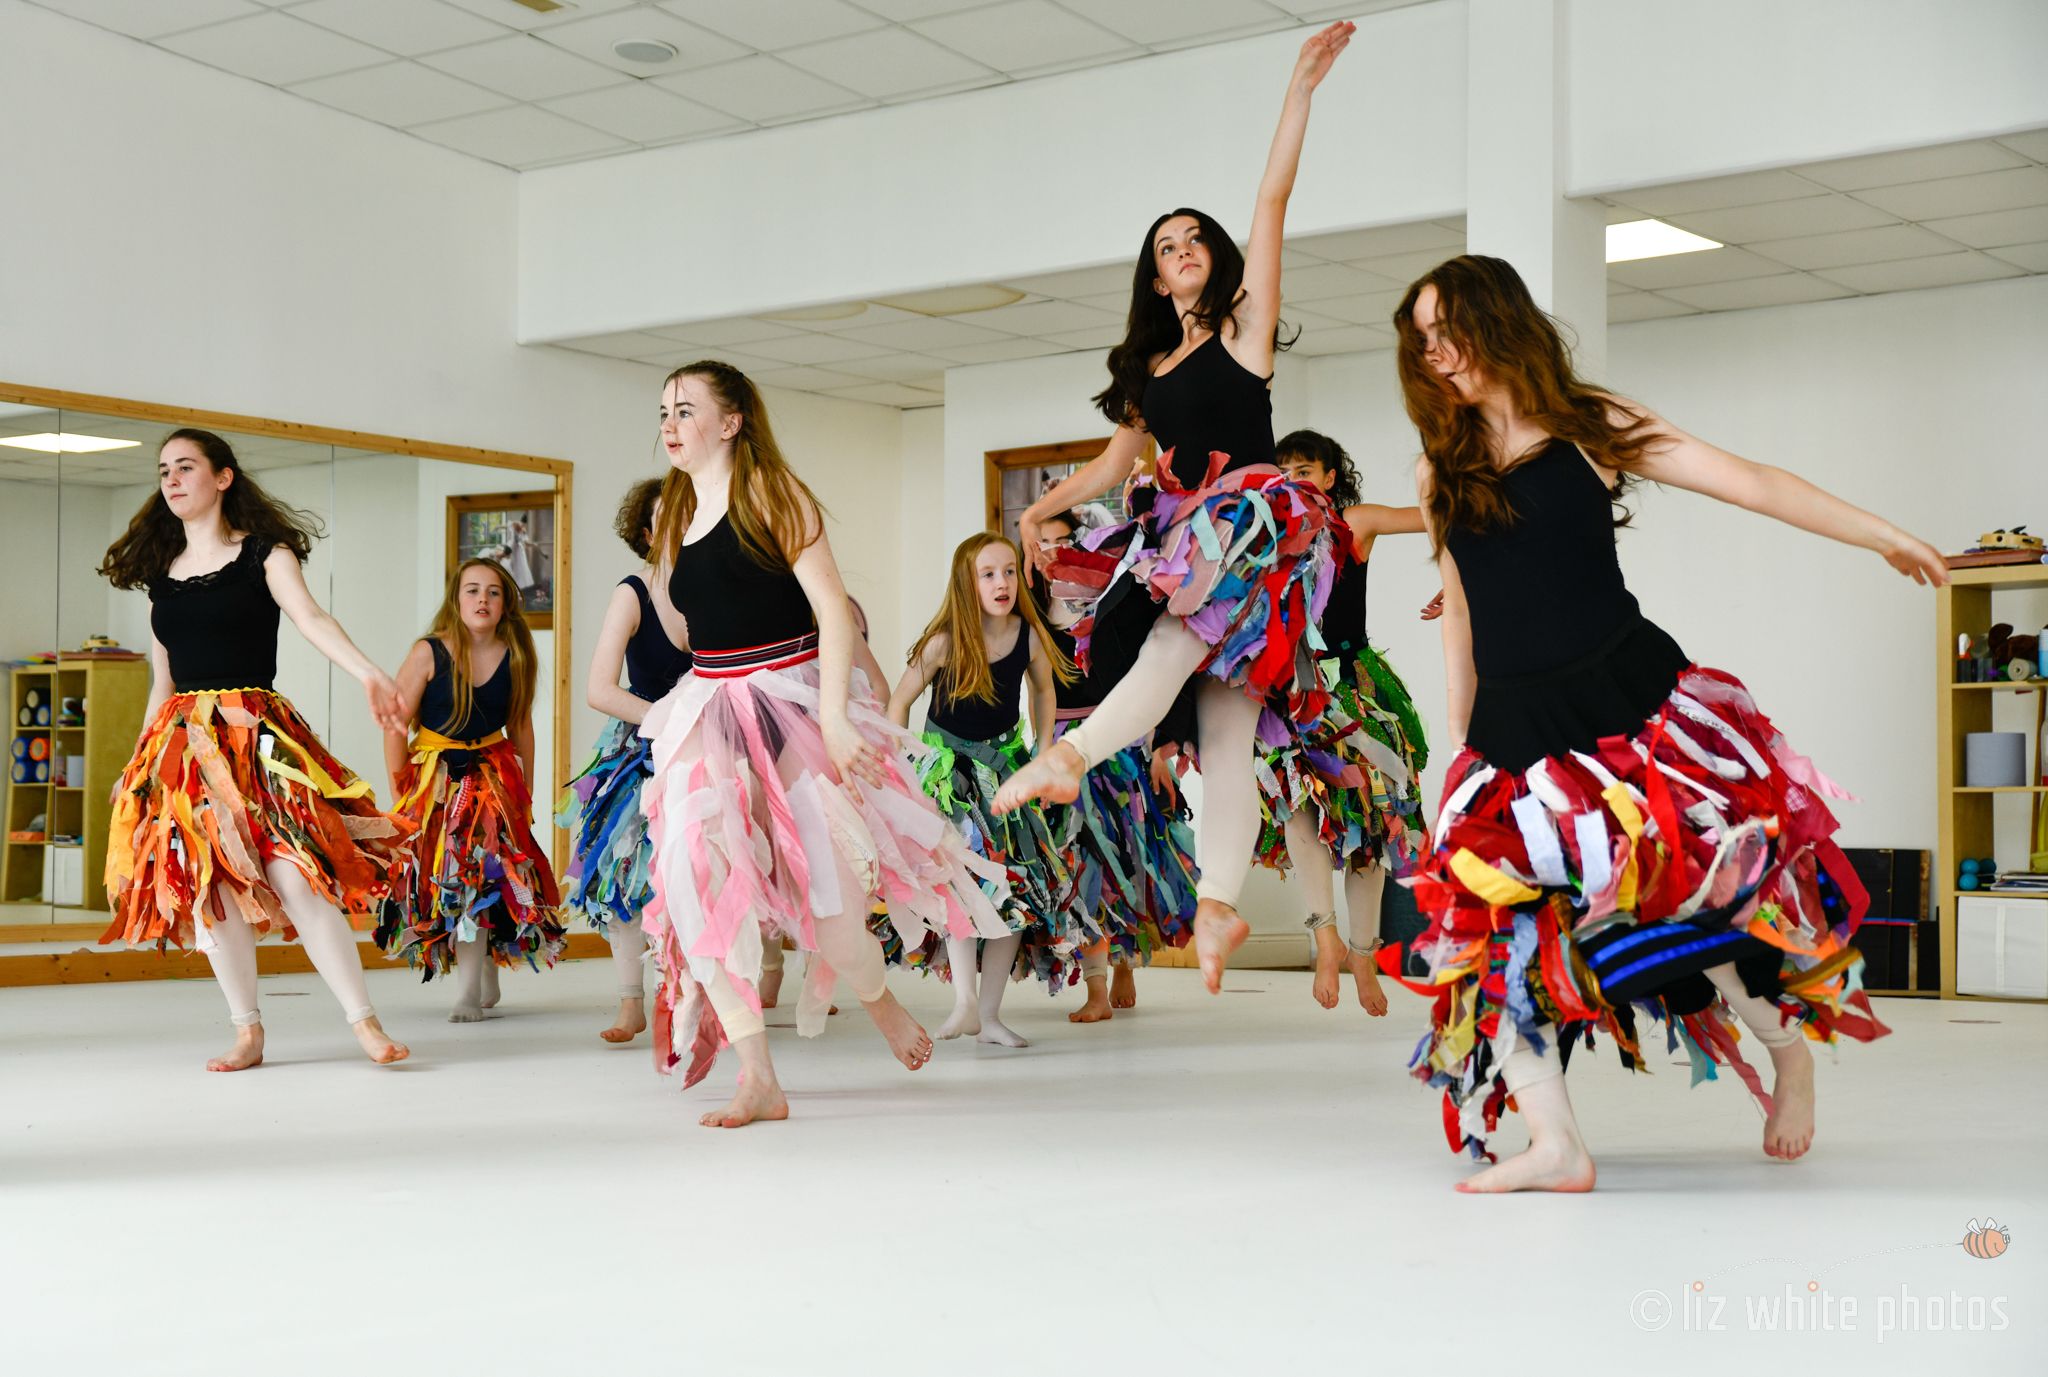 ten teenage students of Ruth Shine School of Dance are practicing ballet in a Dublin dance studio. Their dresses are very colourful except for their tops which are black